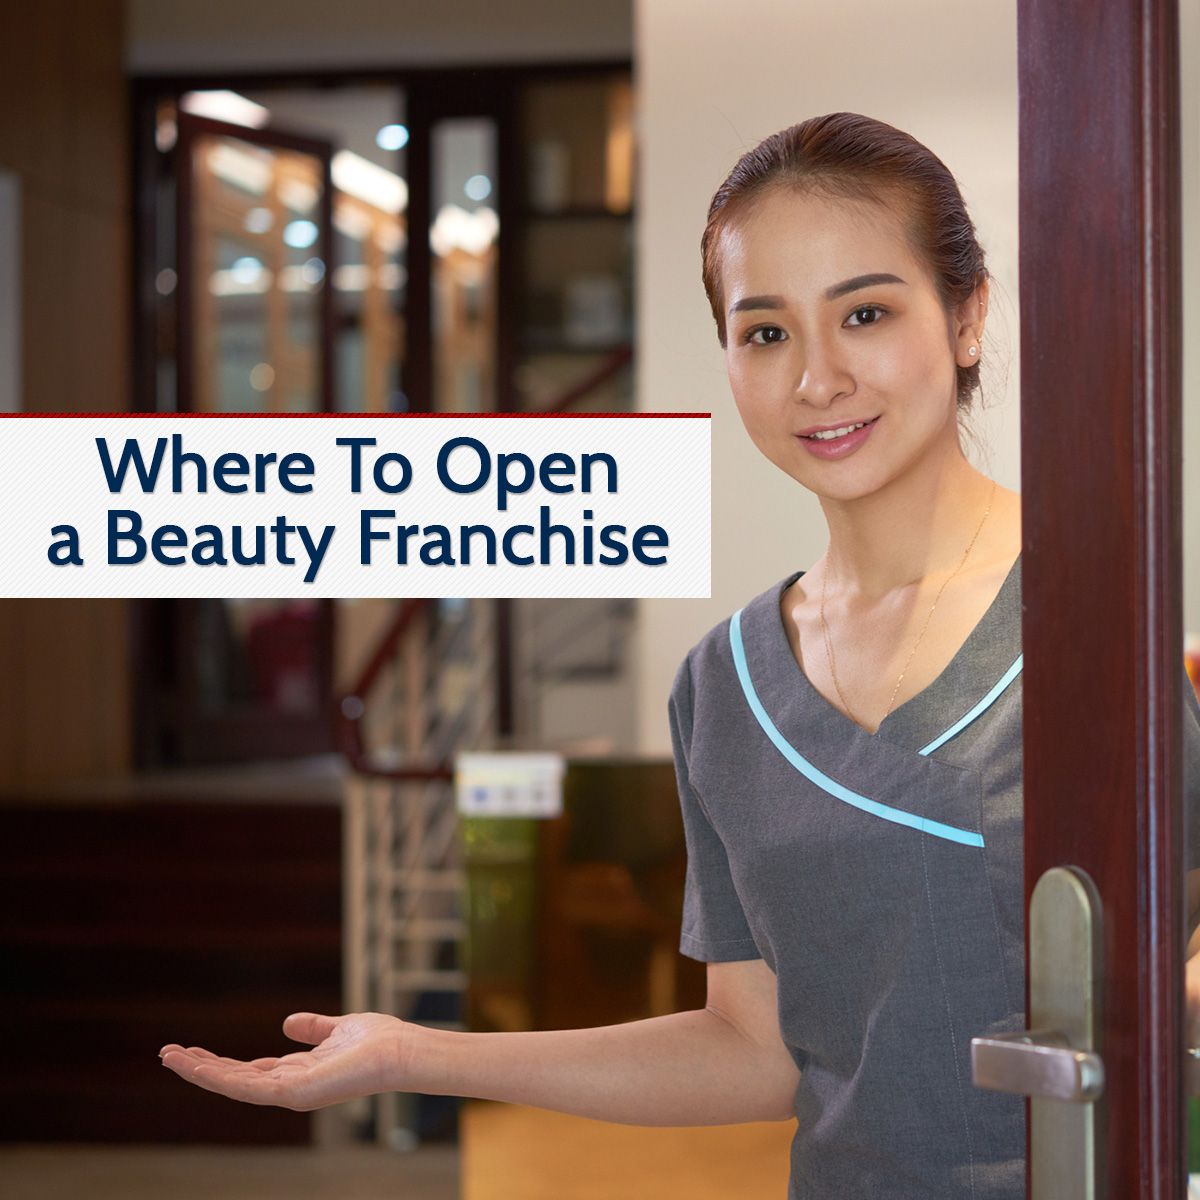 Where To Open a Beauty Franchise